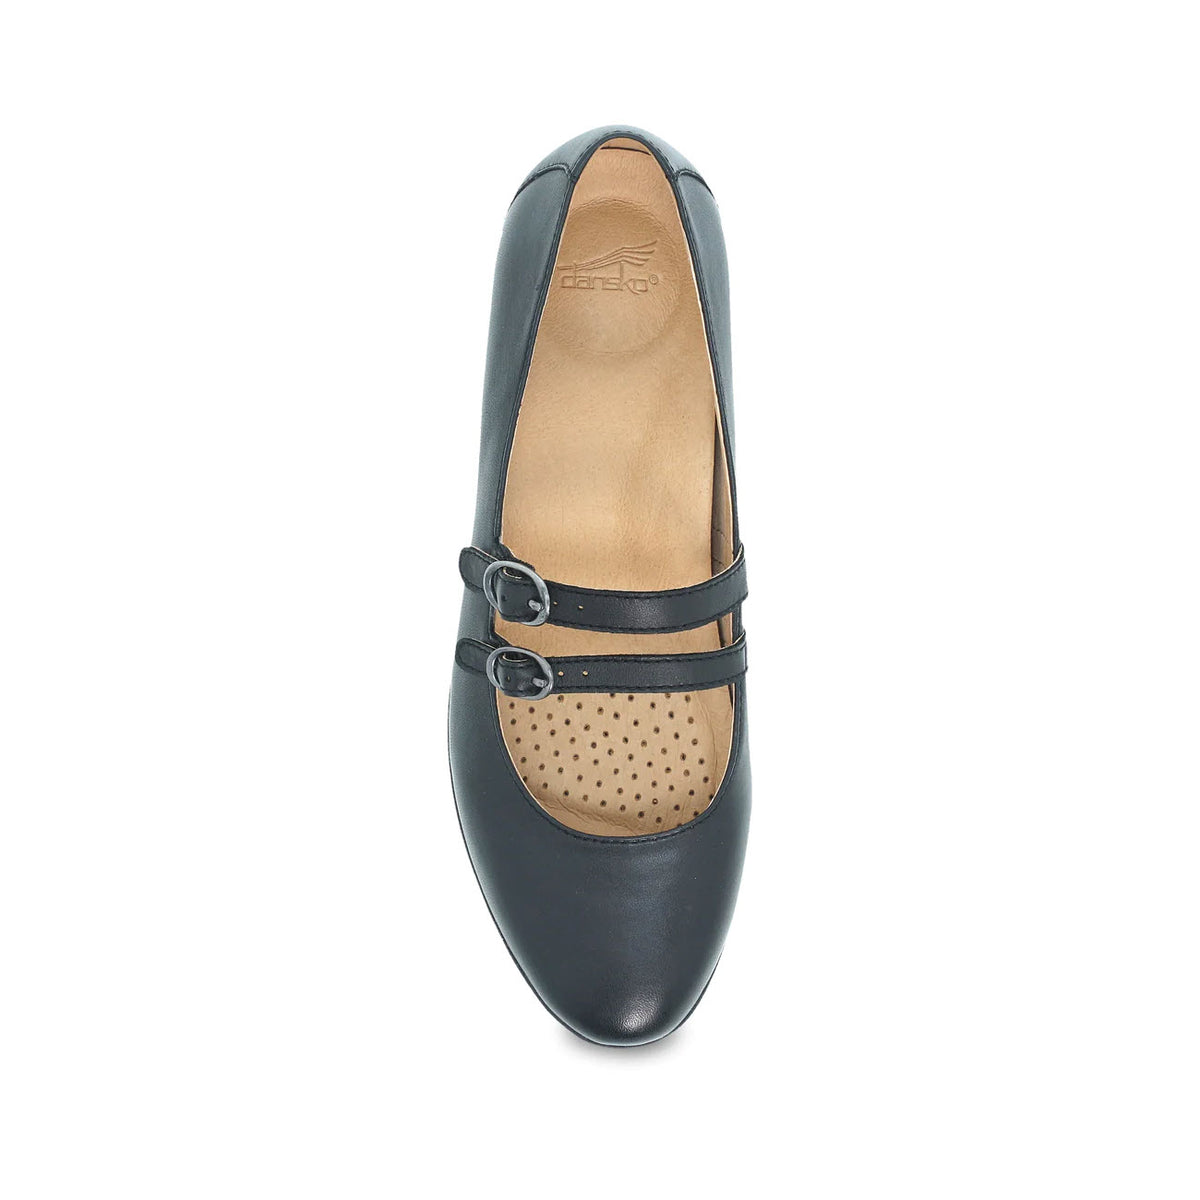 A Dansko Leeza black mary jane shoe with a rounded toe, perforated detail, and an adjustable single buckle strap, viewed from the top.